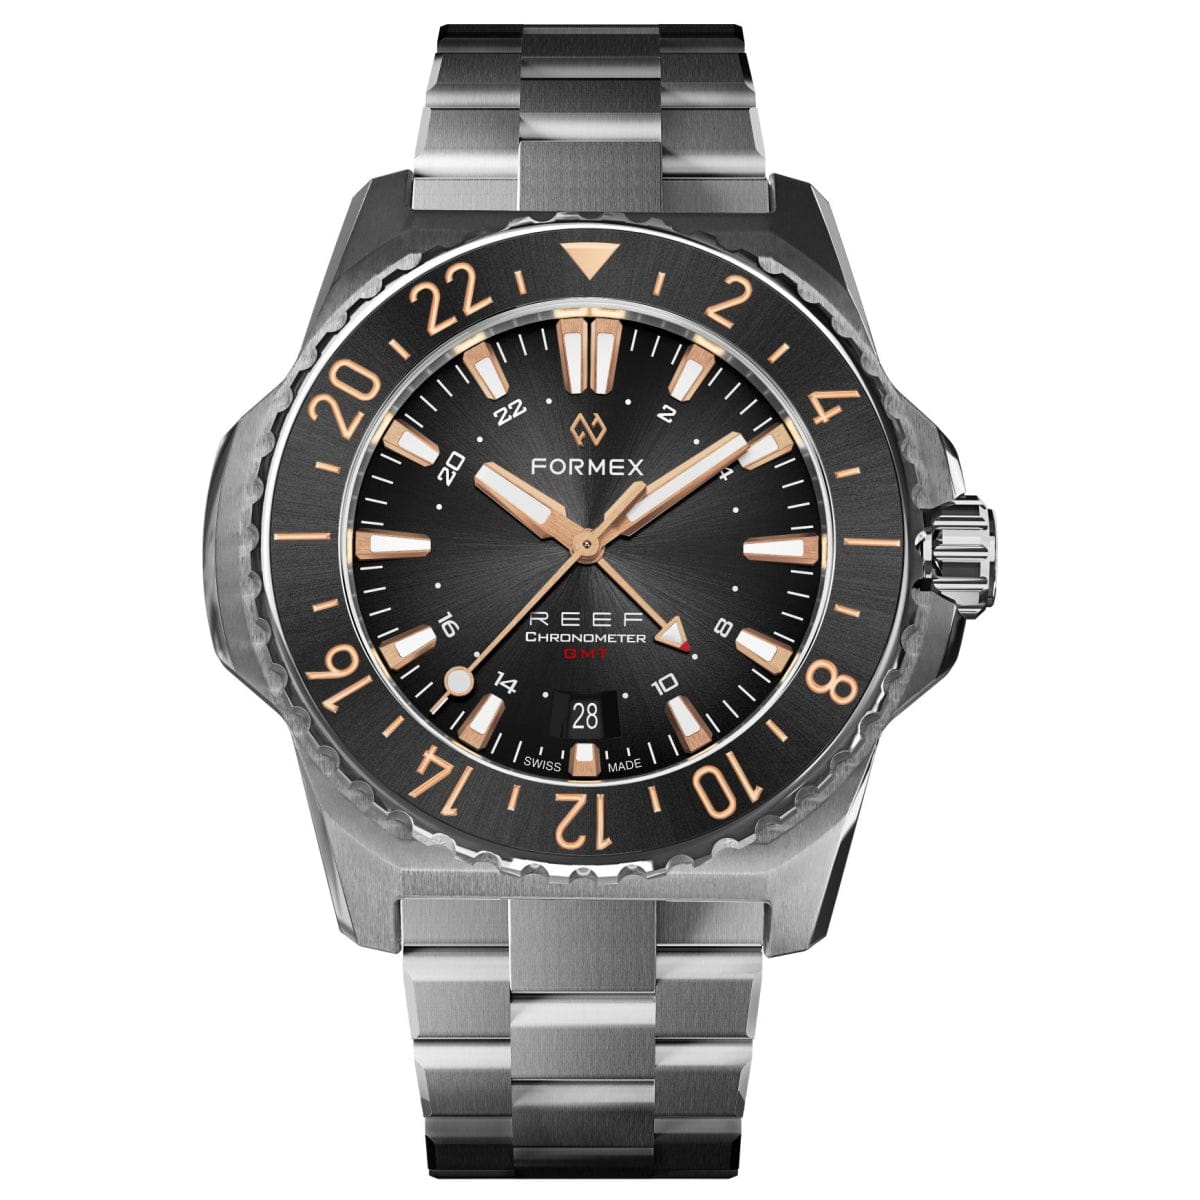 FORMEX REEF GMT - Black Dial with Rose Gold Elements - Stainless Steel